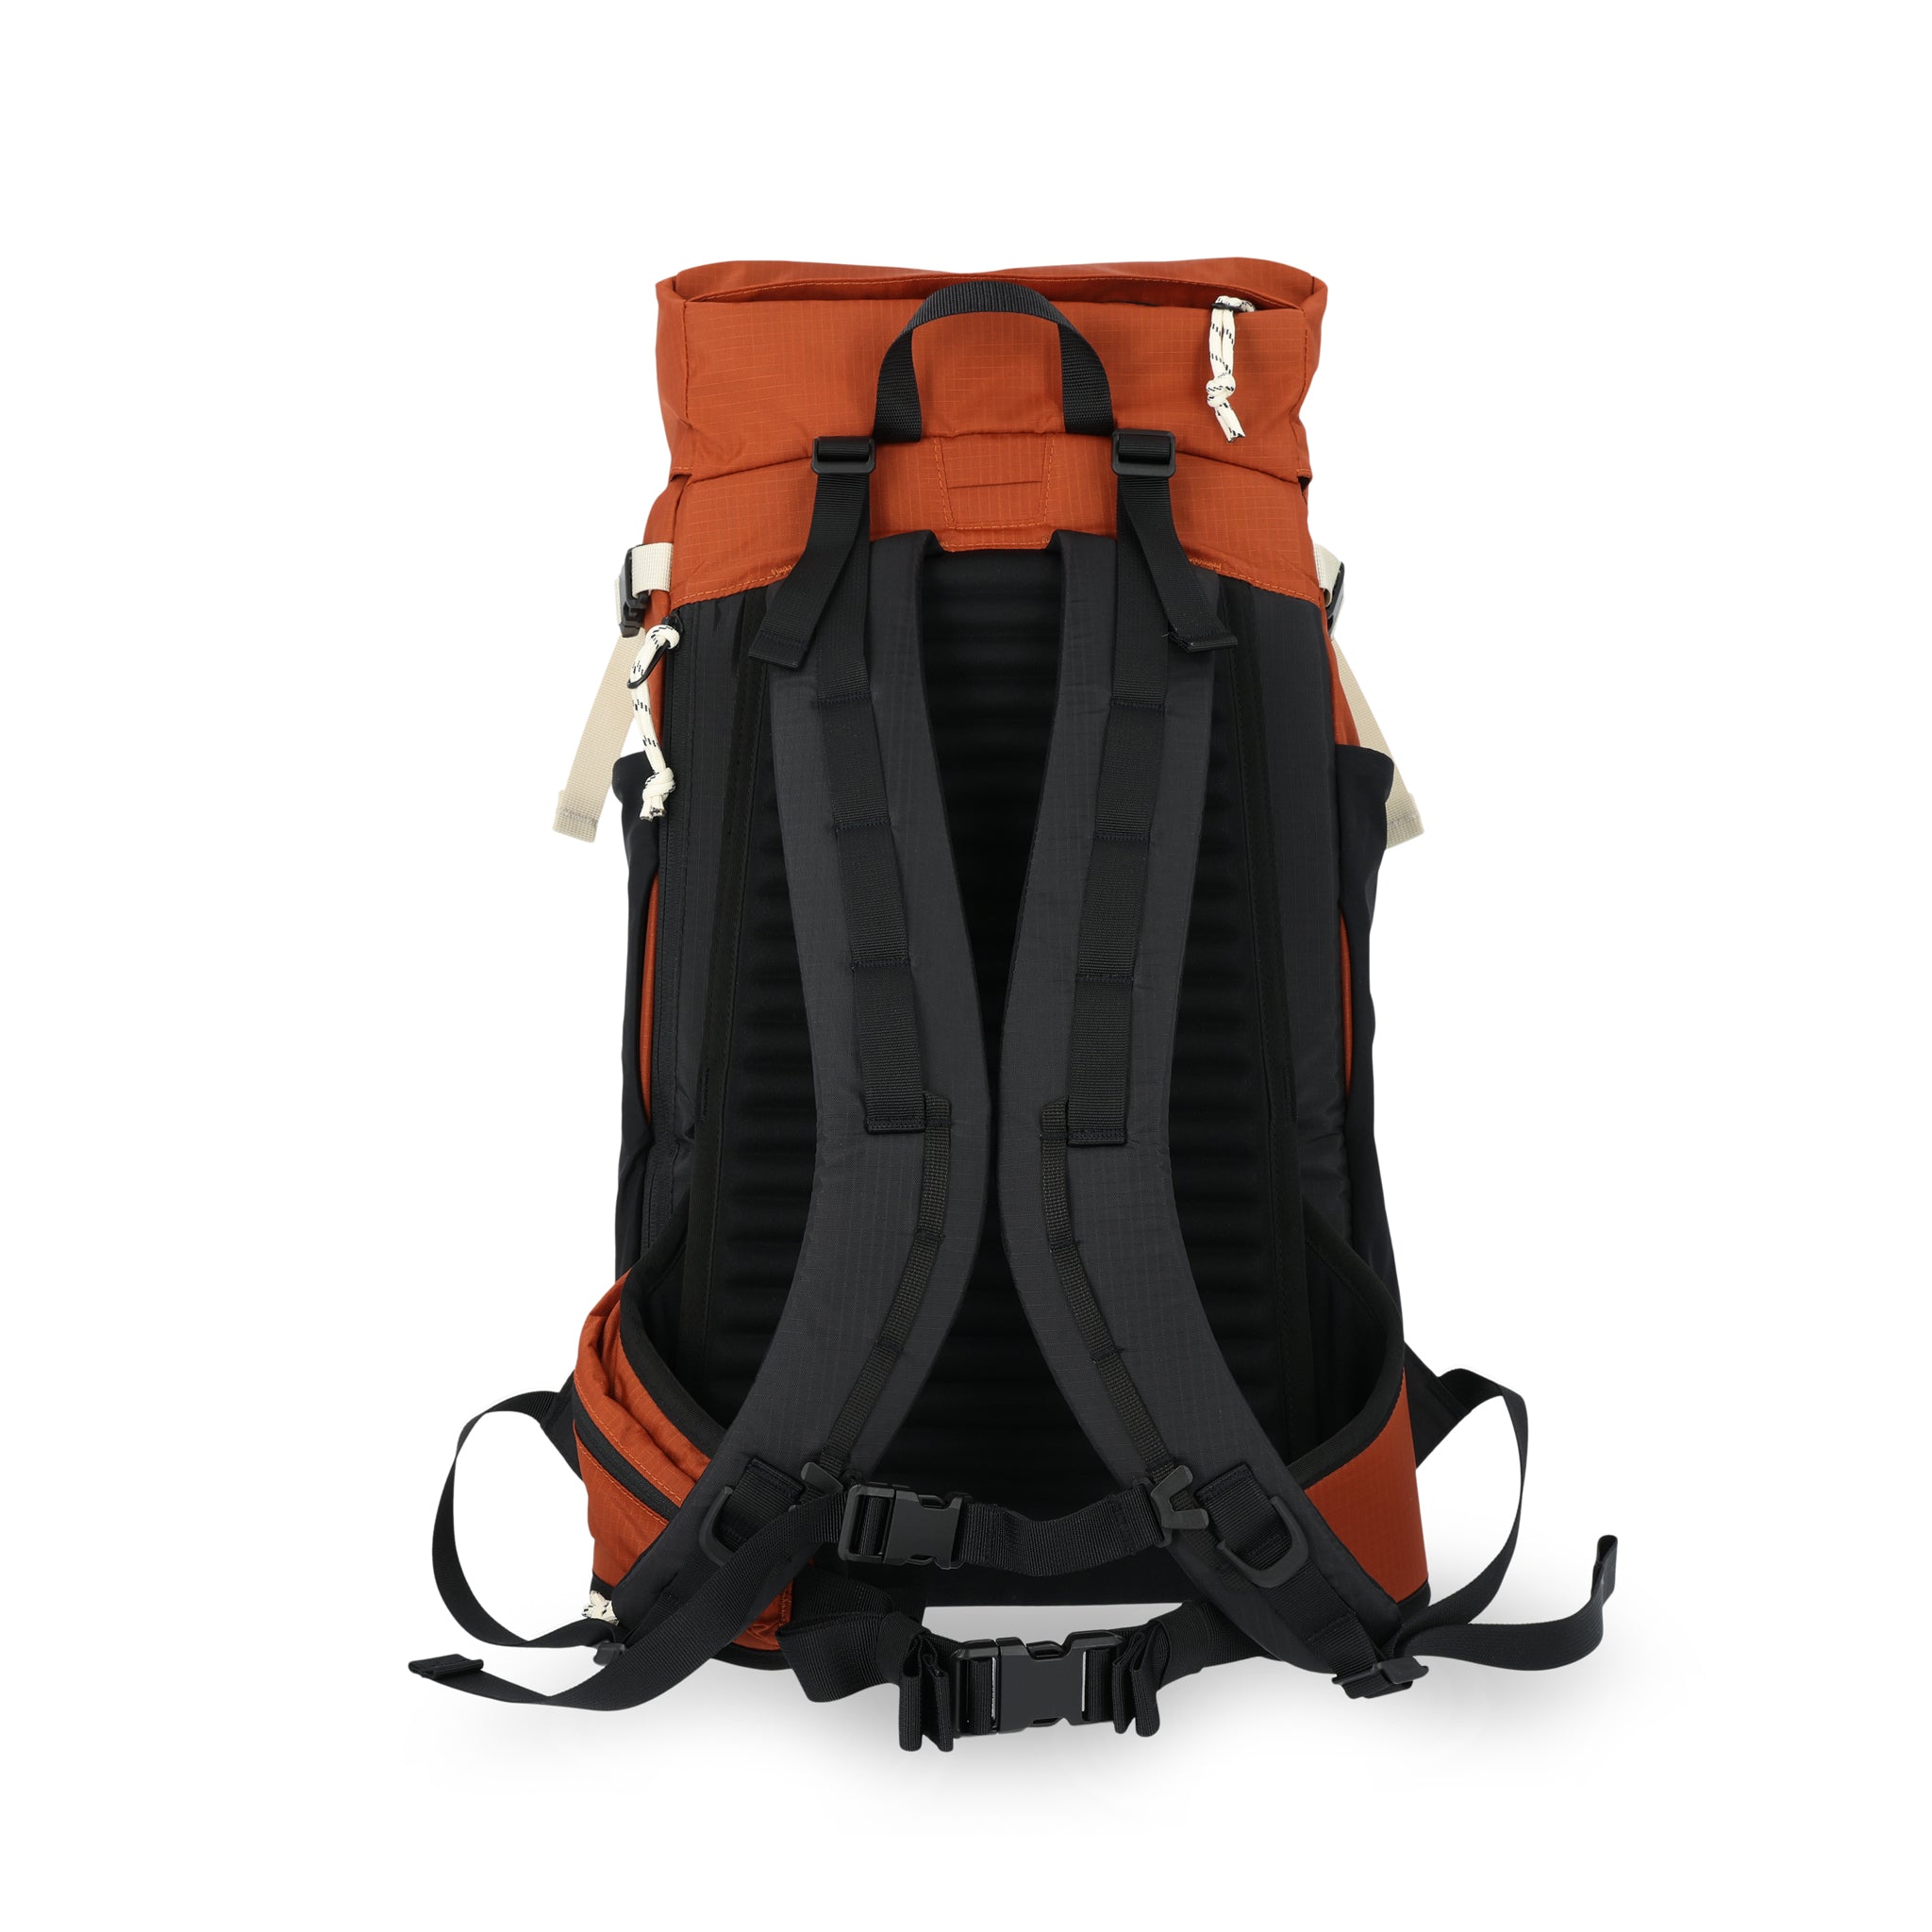 General shot of padded shoulder straps, sternum strap, and waist belt on Topo Designs Mountain Pack 28L hiking backpack with external laptop sleeve access in lightweight recycled clay orange black nylon.